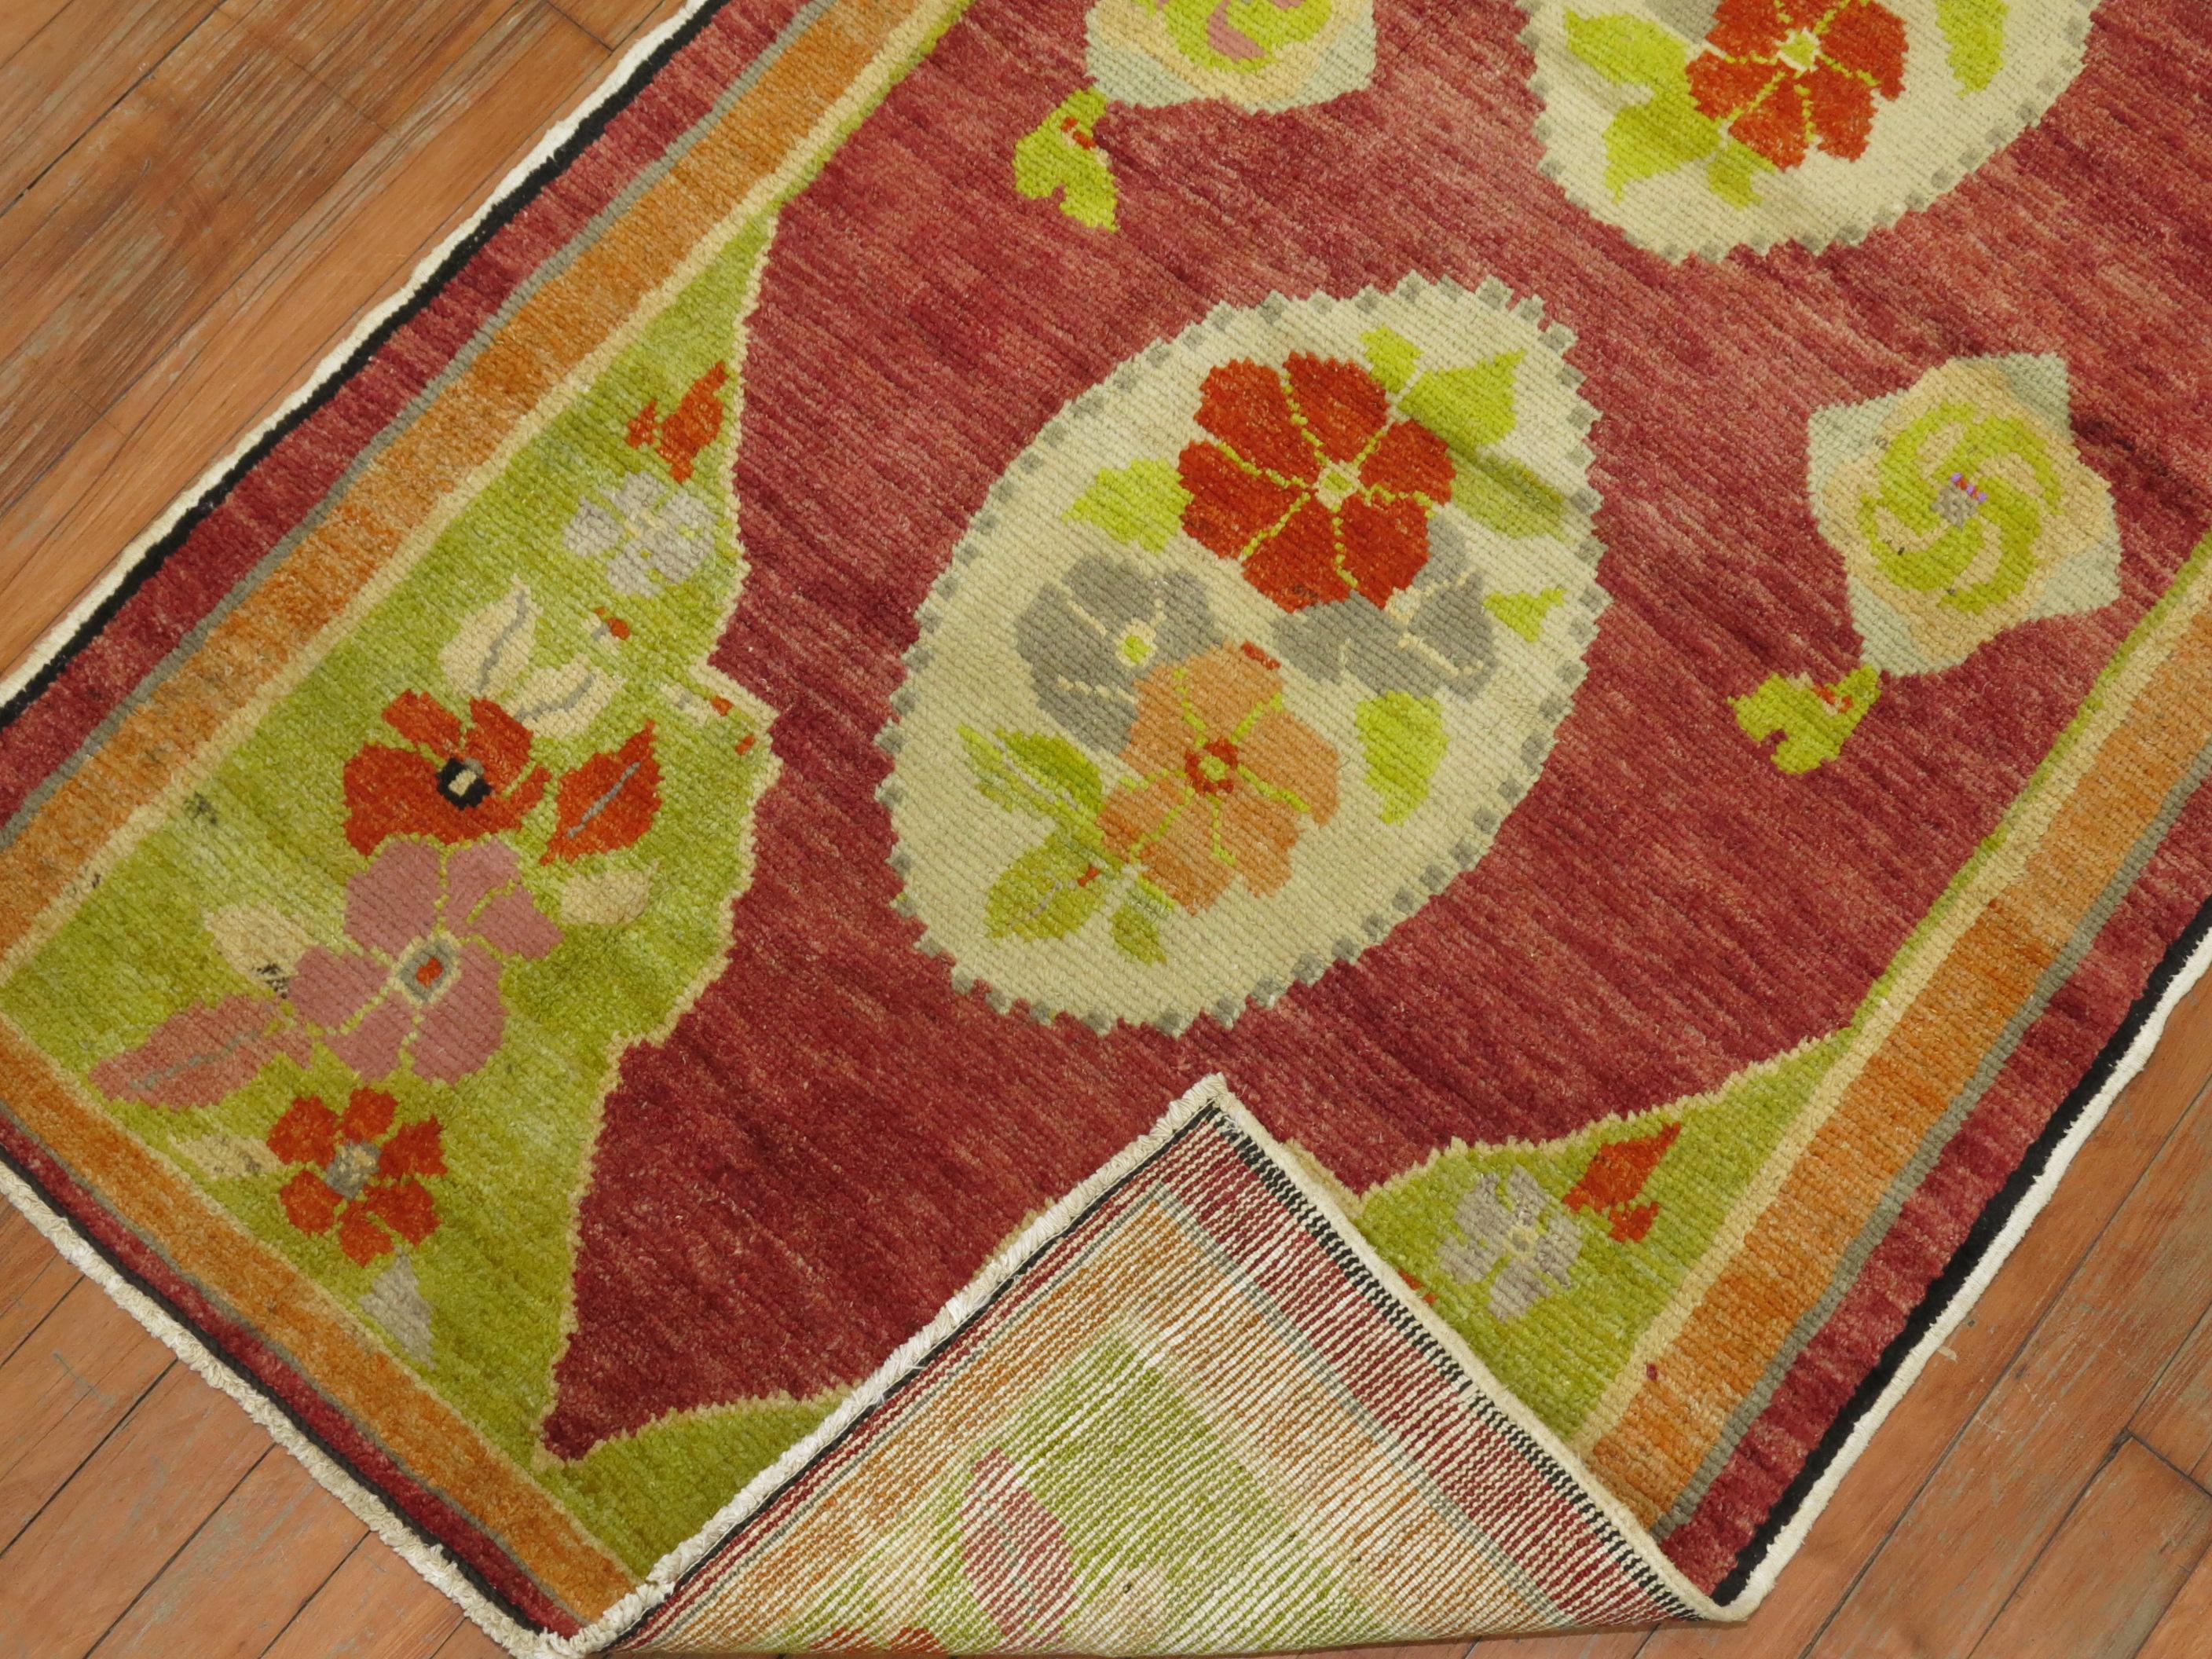 Vintage Turkish Oushak runner in bright red and lime green

Measures: 2'11